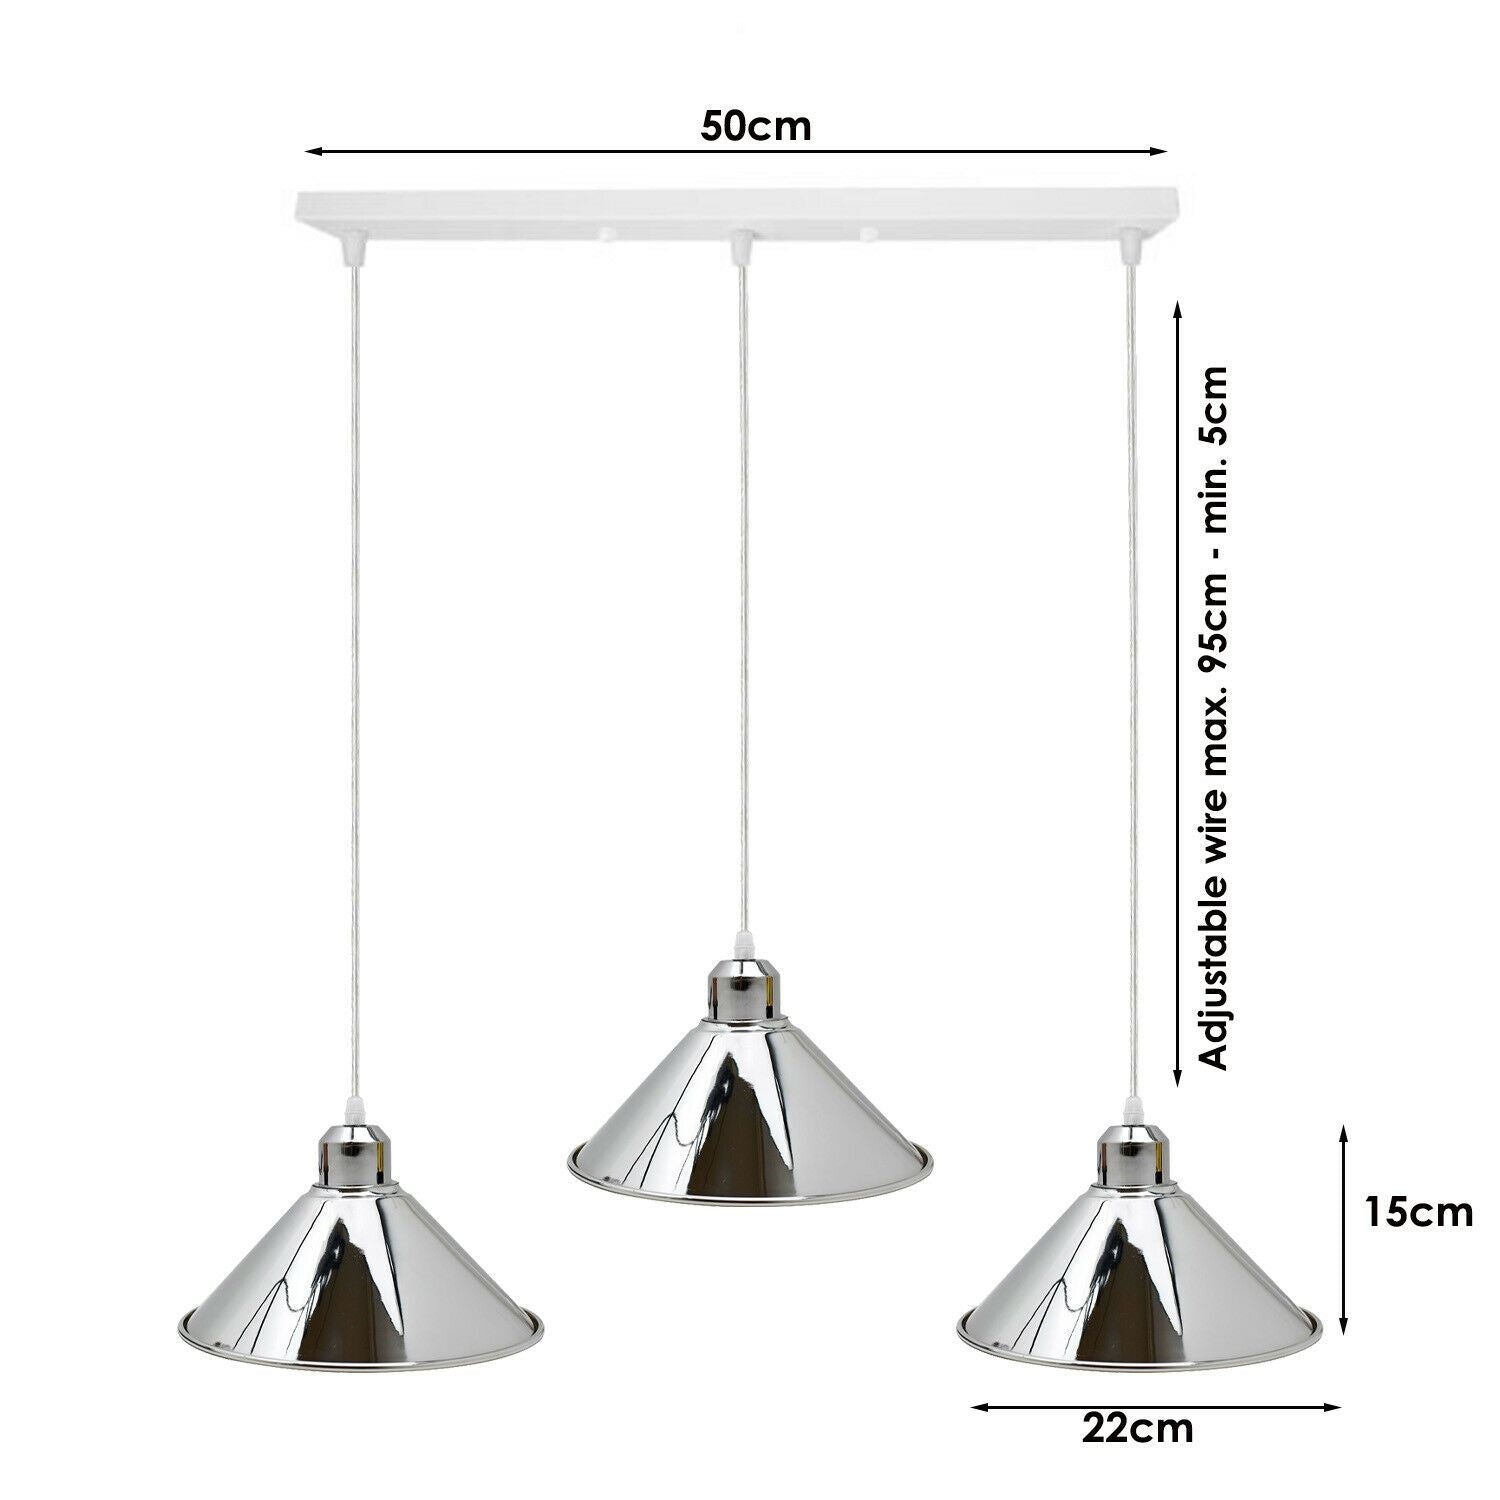 Modern Industrial Chrome 3 Way Ceiling Pendant Light Metal Cone Shape Shade Indoor Hanging Lighting For Bedroom, Dining Room, Living Room~1183